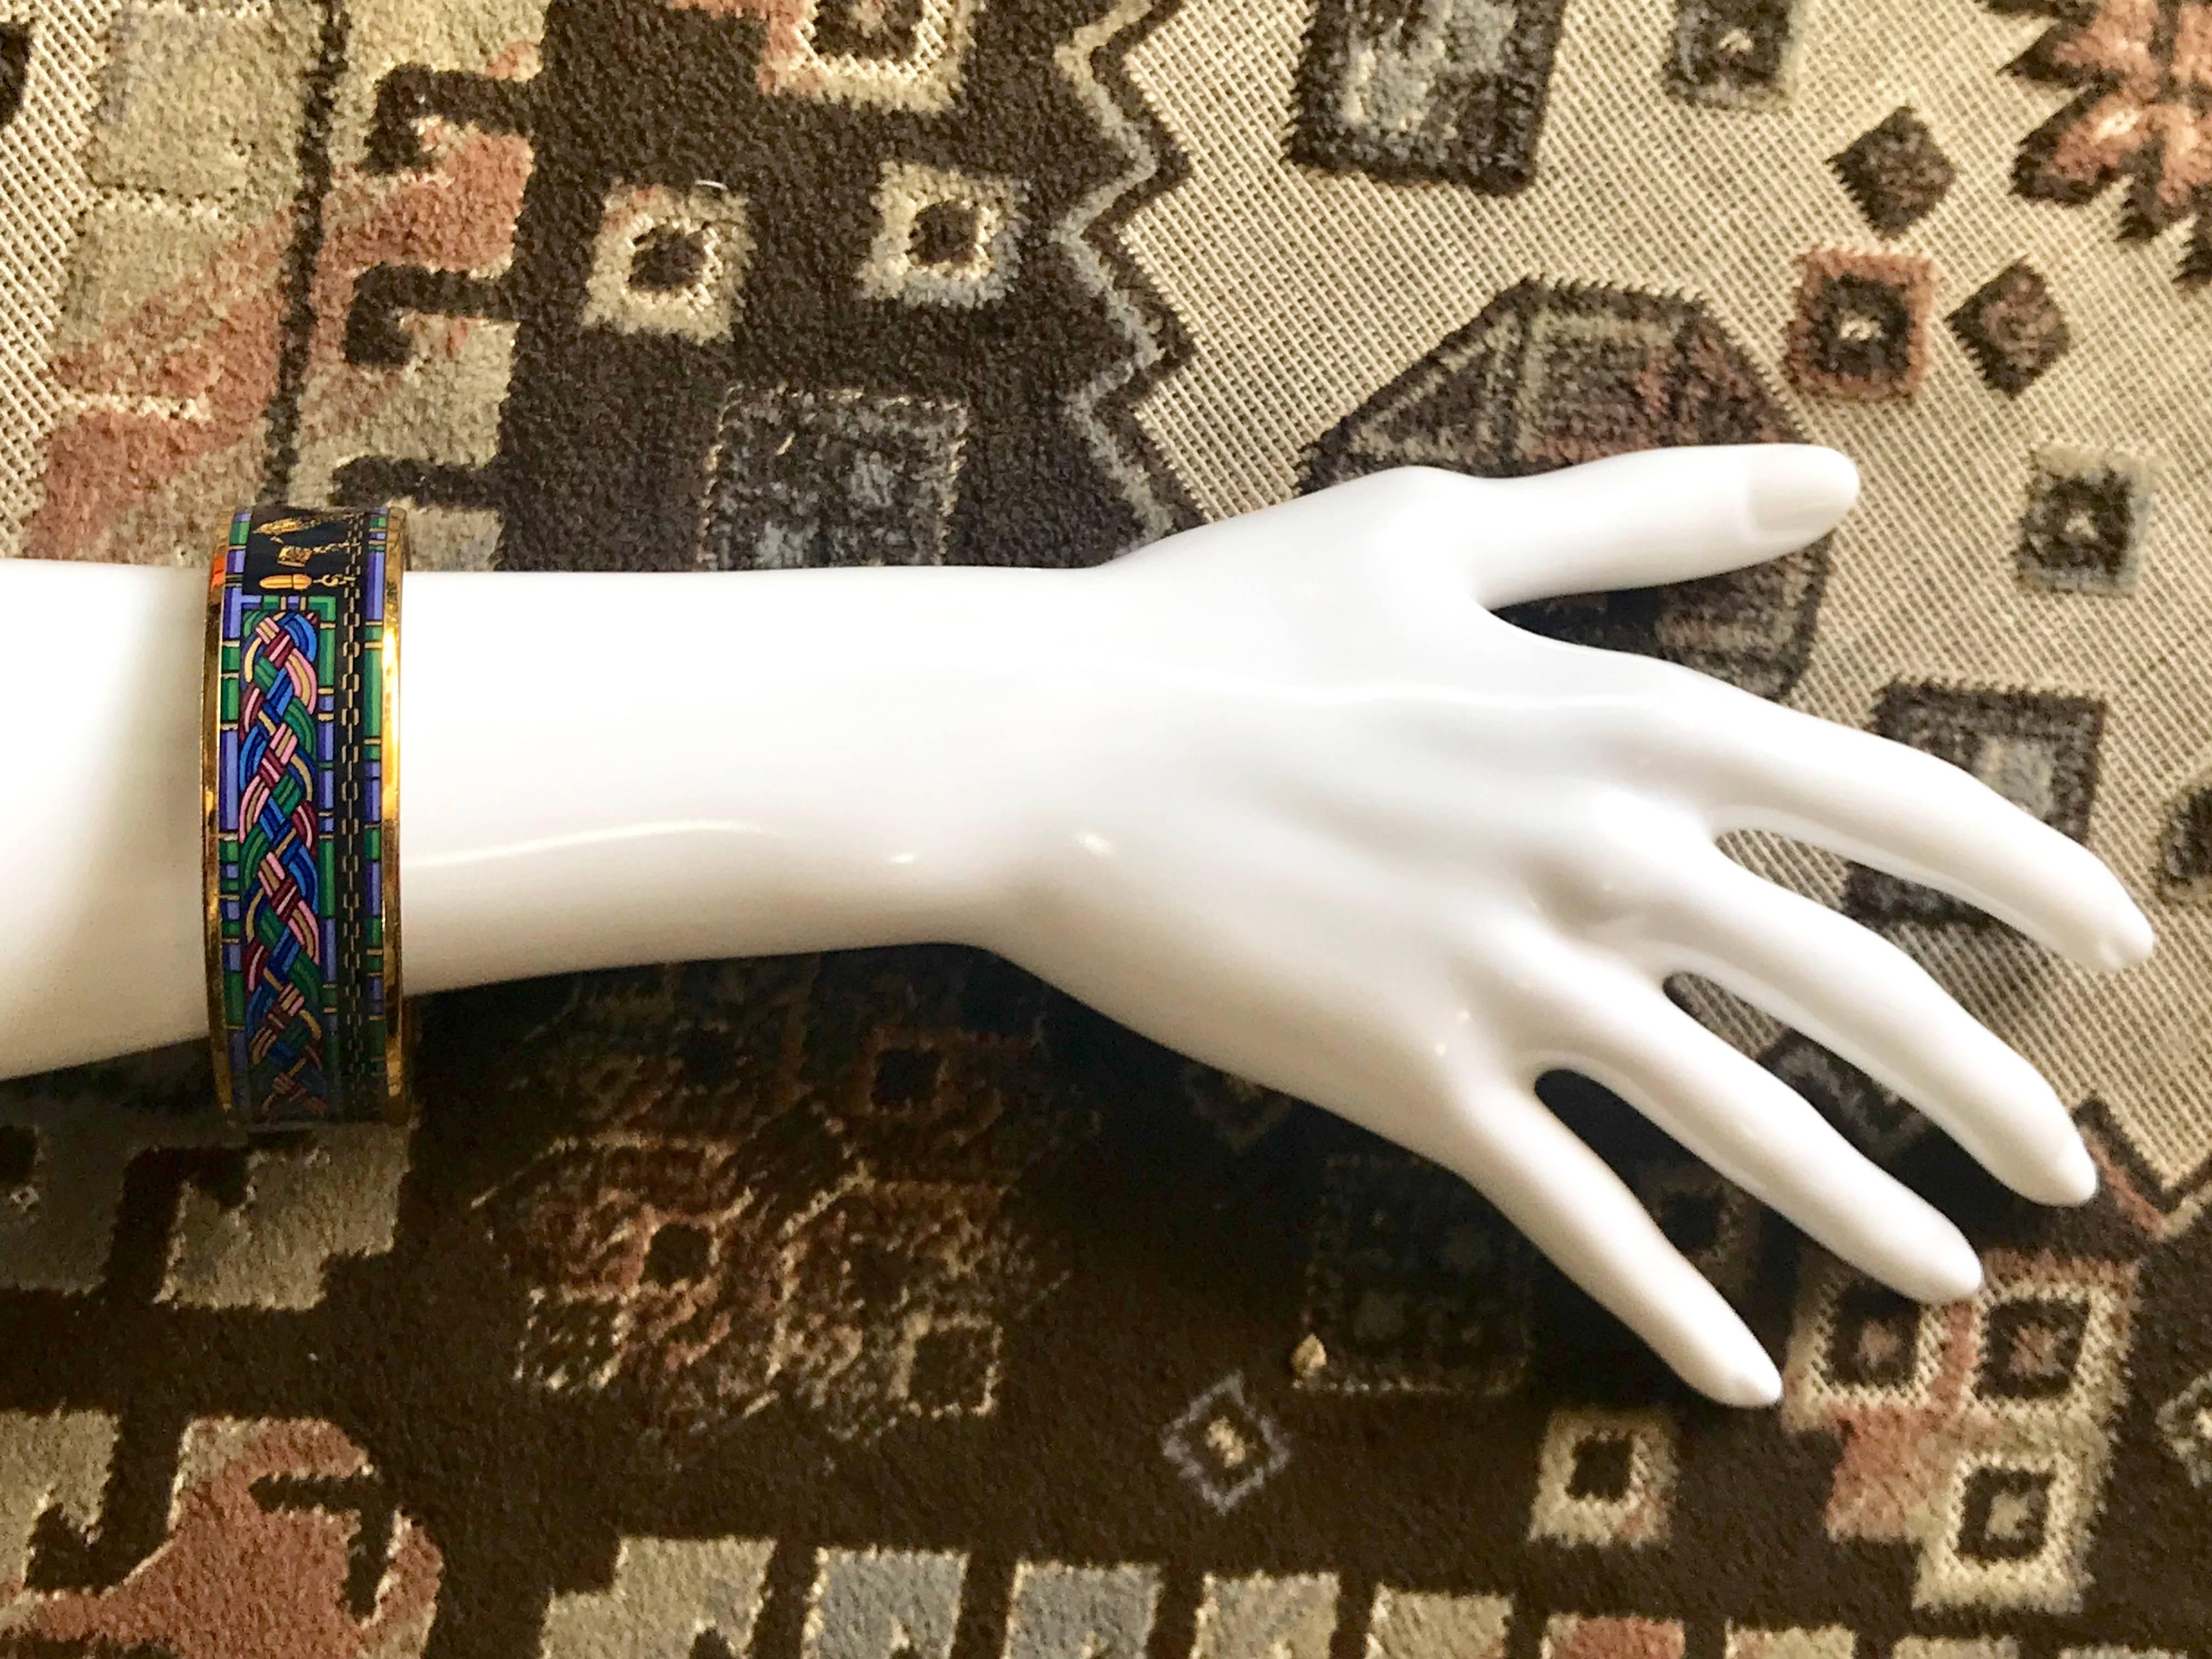 1990s. Vintage Hermes golden enamel/cloisonné bangle, bracelet with blue, purple, green, pink etc multicolor. Scissors, Jewelry case illustration. Beautiful classic jewelry from Hermes.

Introducing a fantastic bangle from HERMES....
The iconic